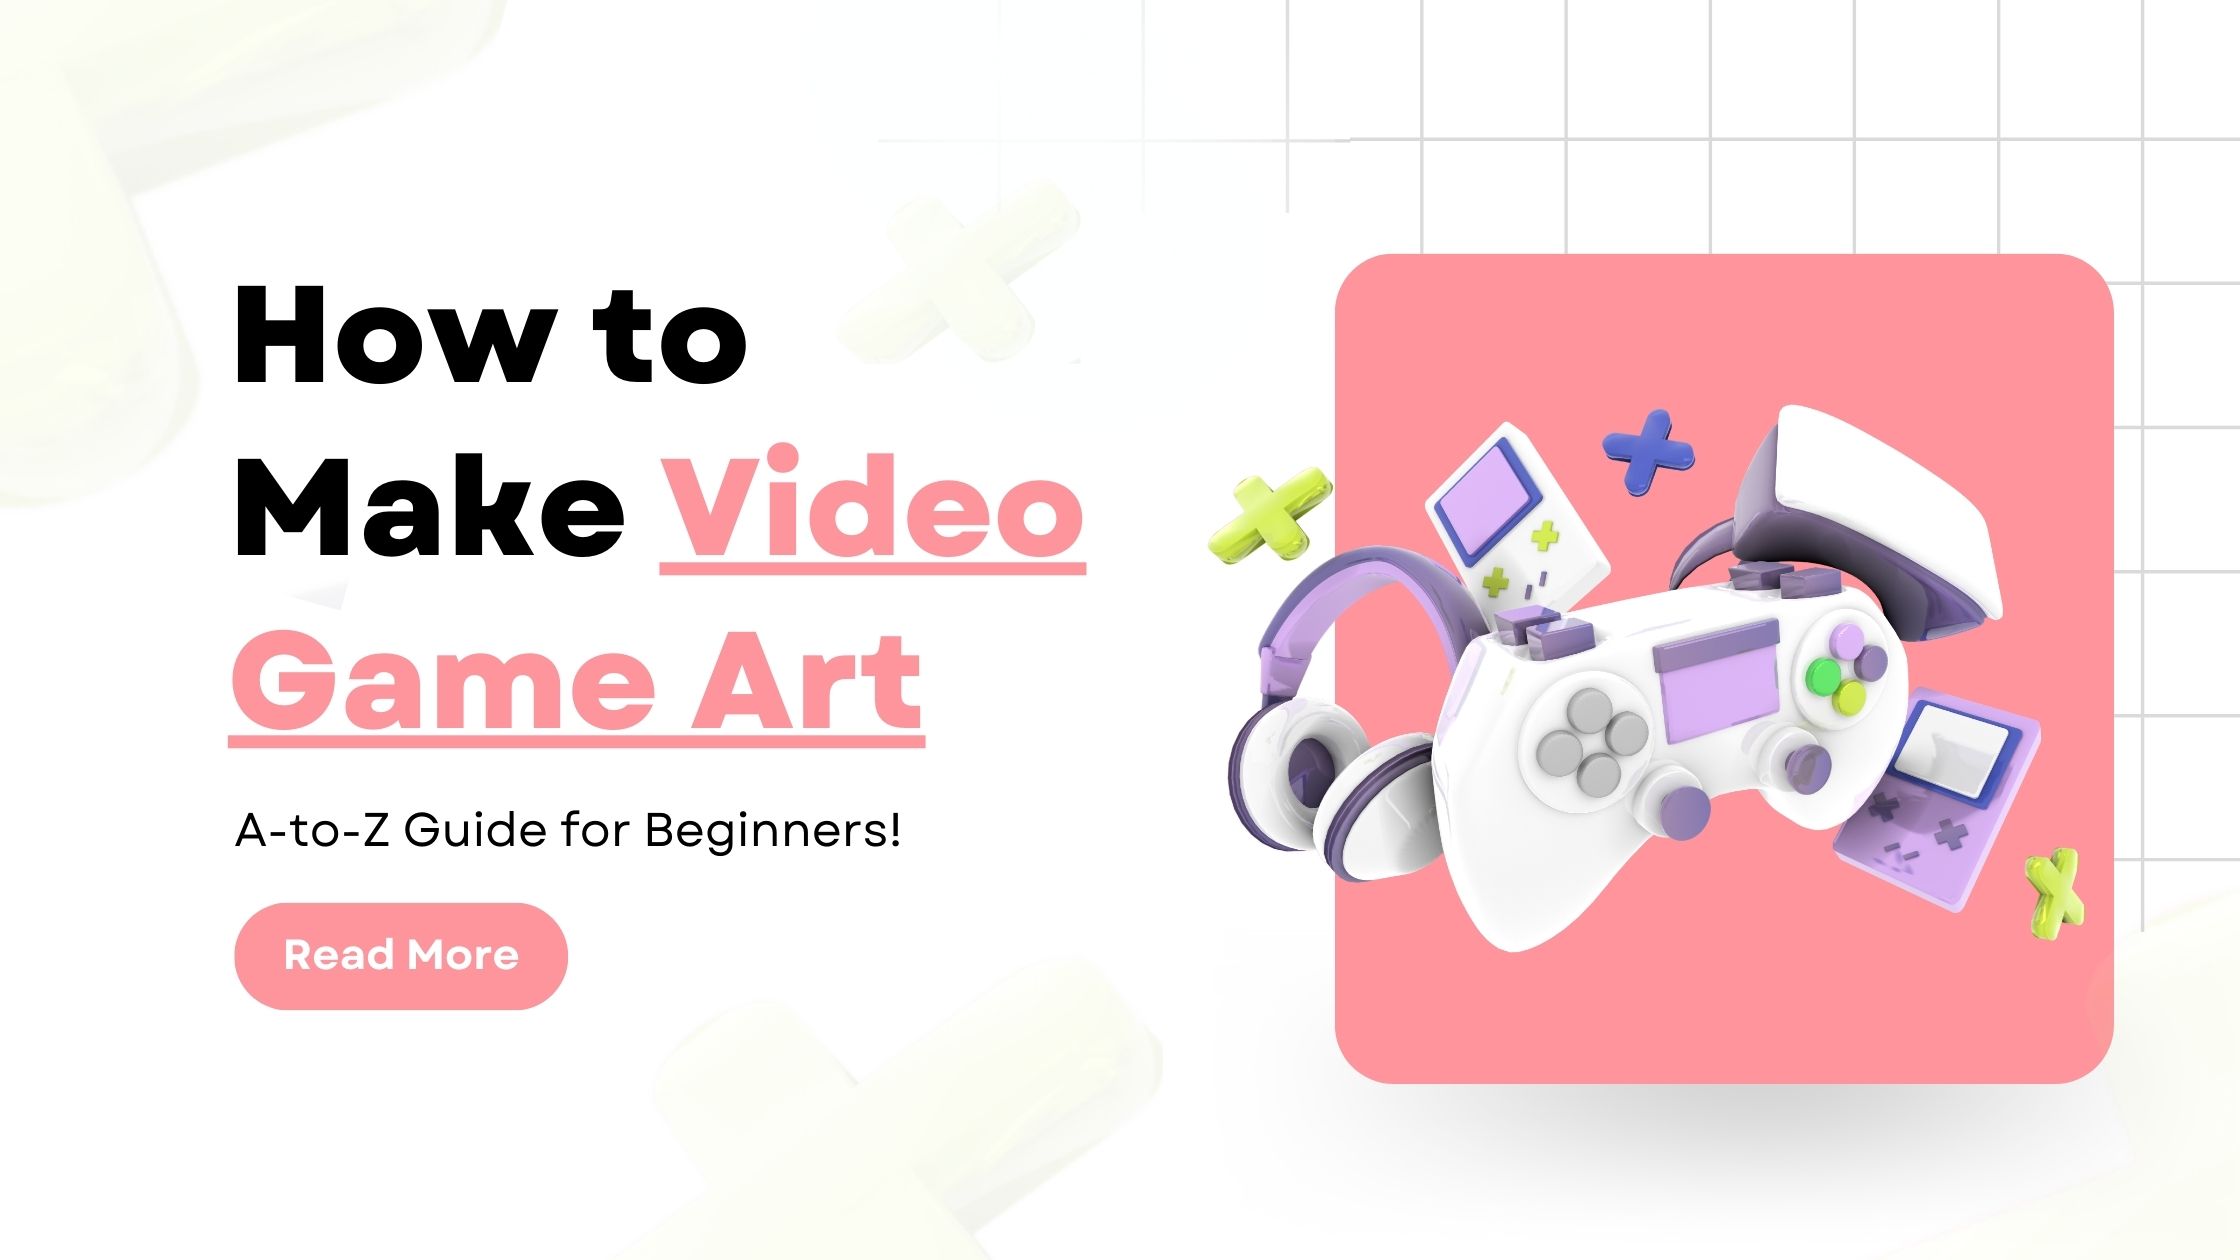 How to Make Video Game Art